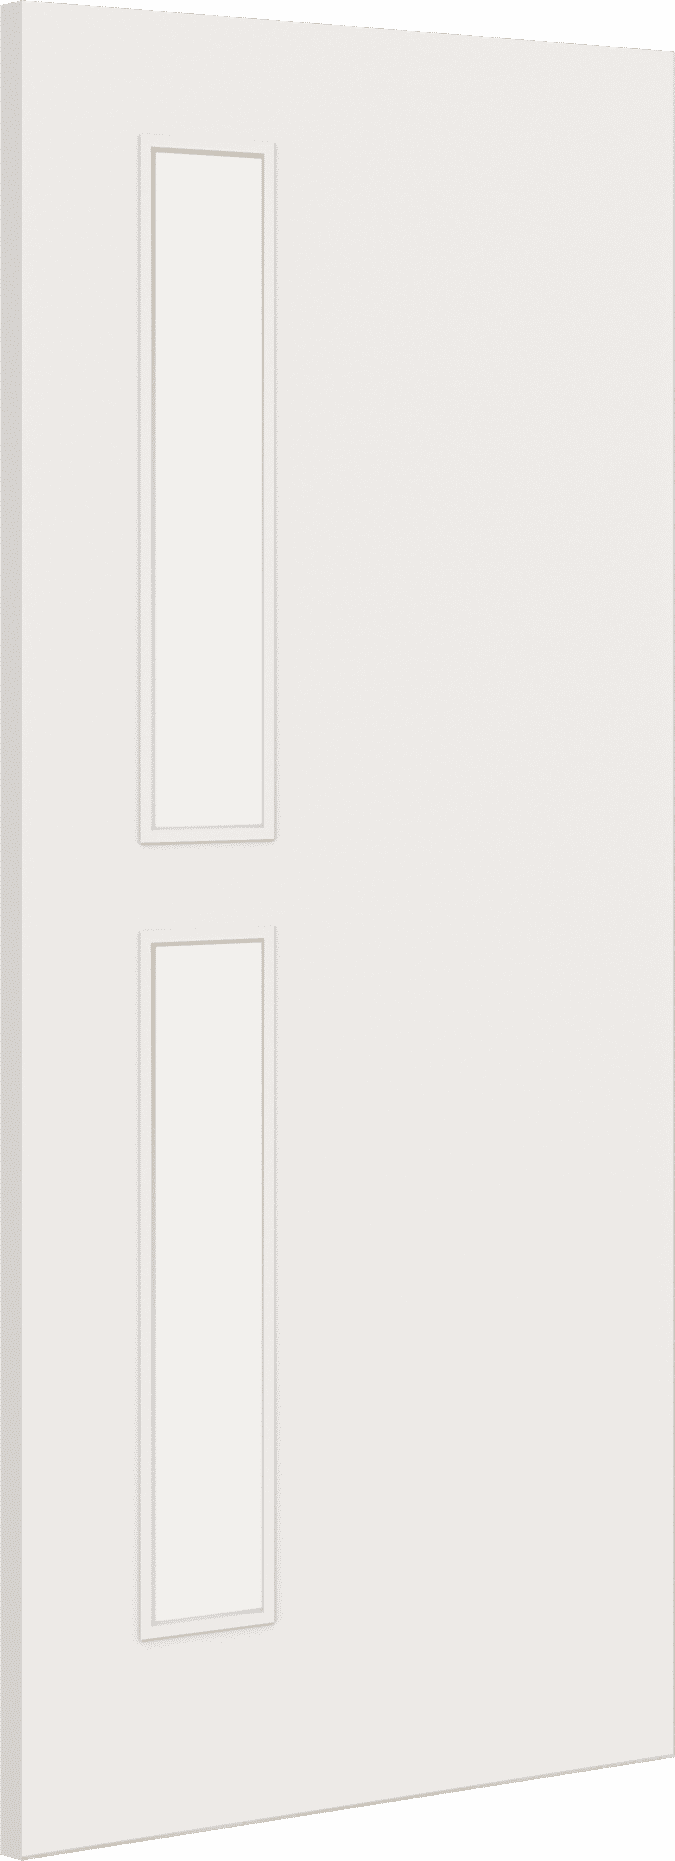 2040mm x 626mm x 44mm Architectural Paint Grade White 07 Clear Glazed Fire Door Blank